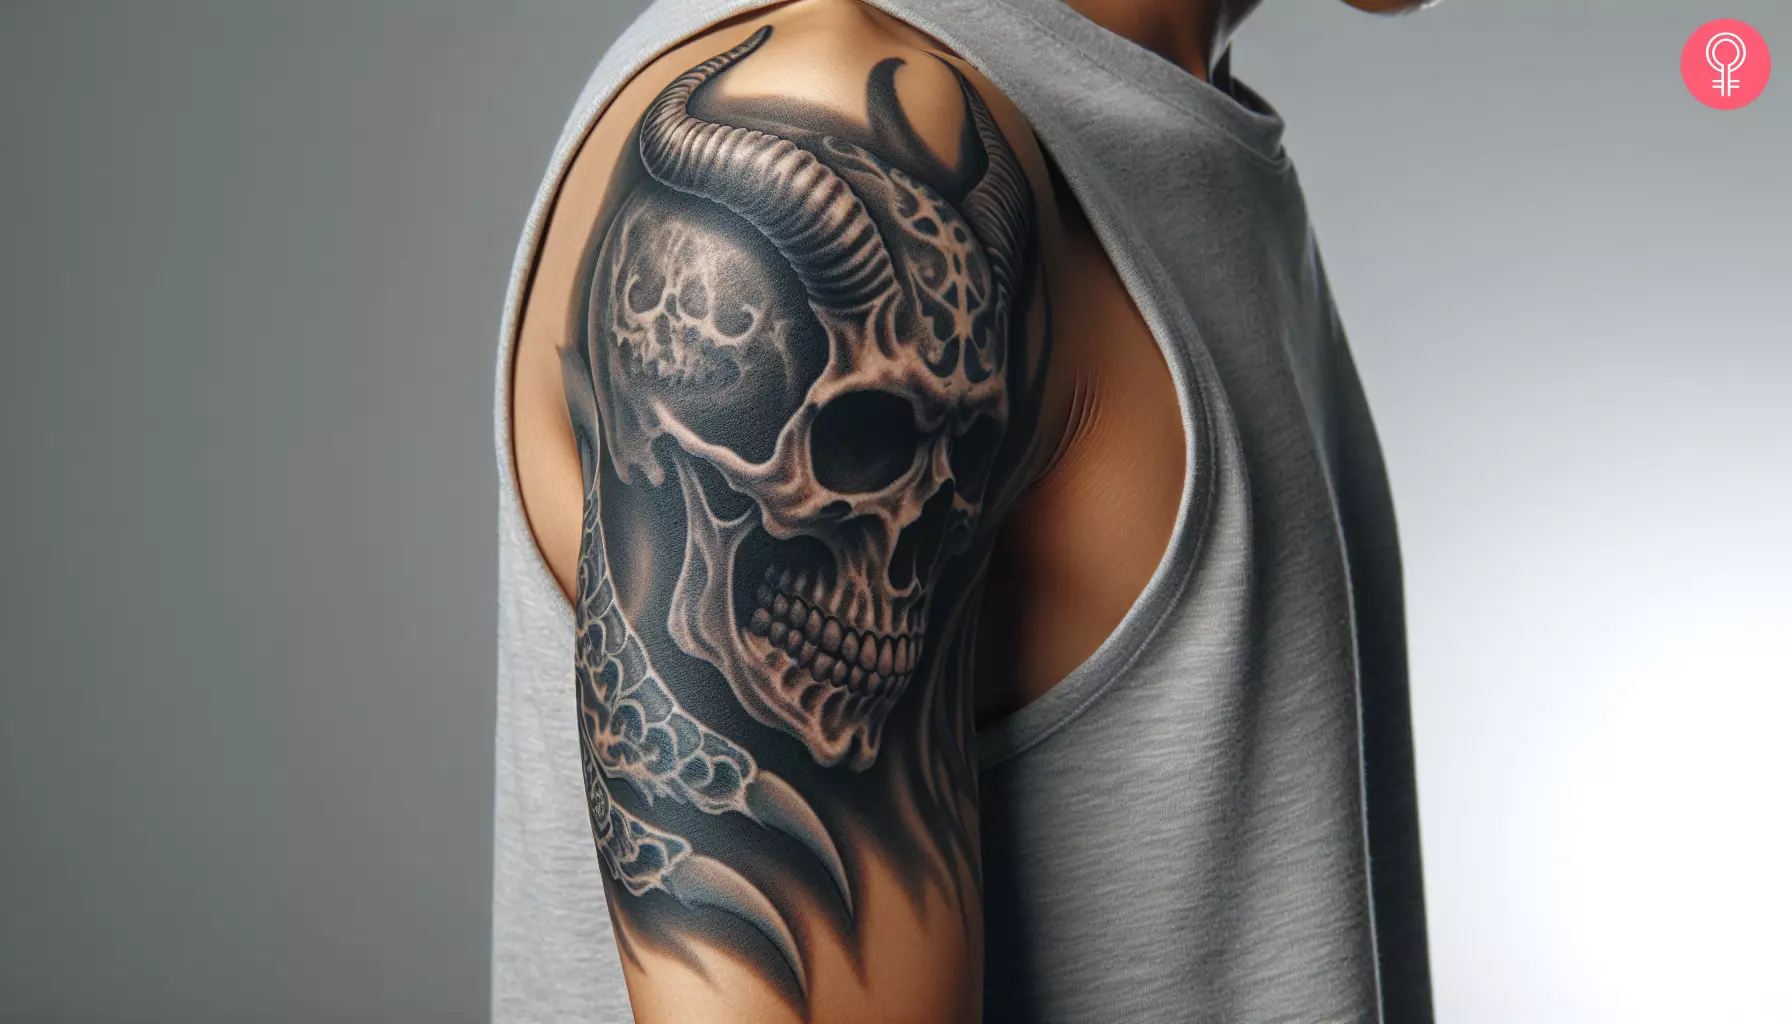 Man with realistic evil skull tattoo on his upper arm